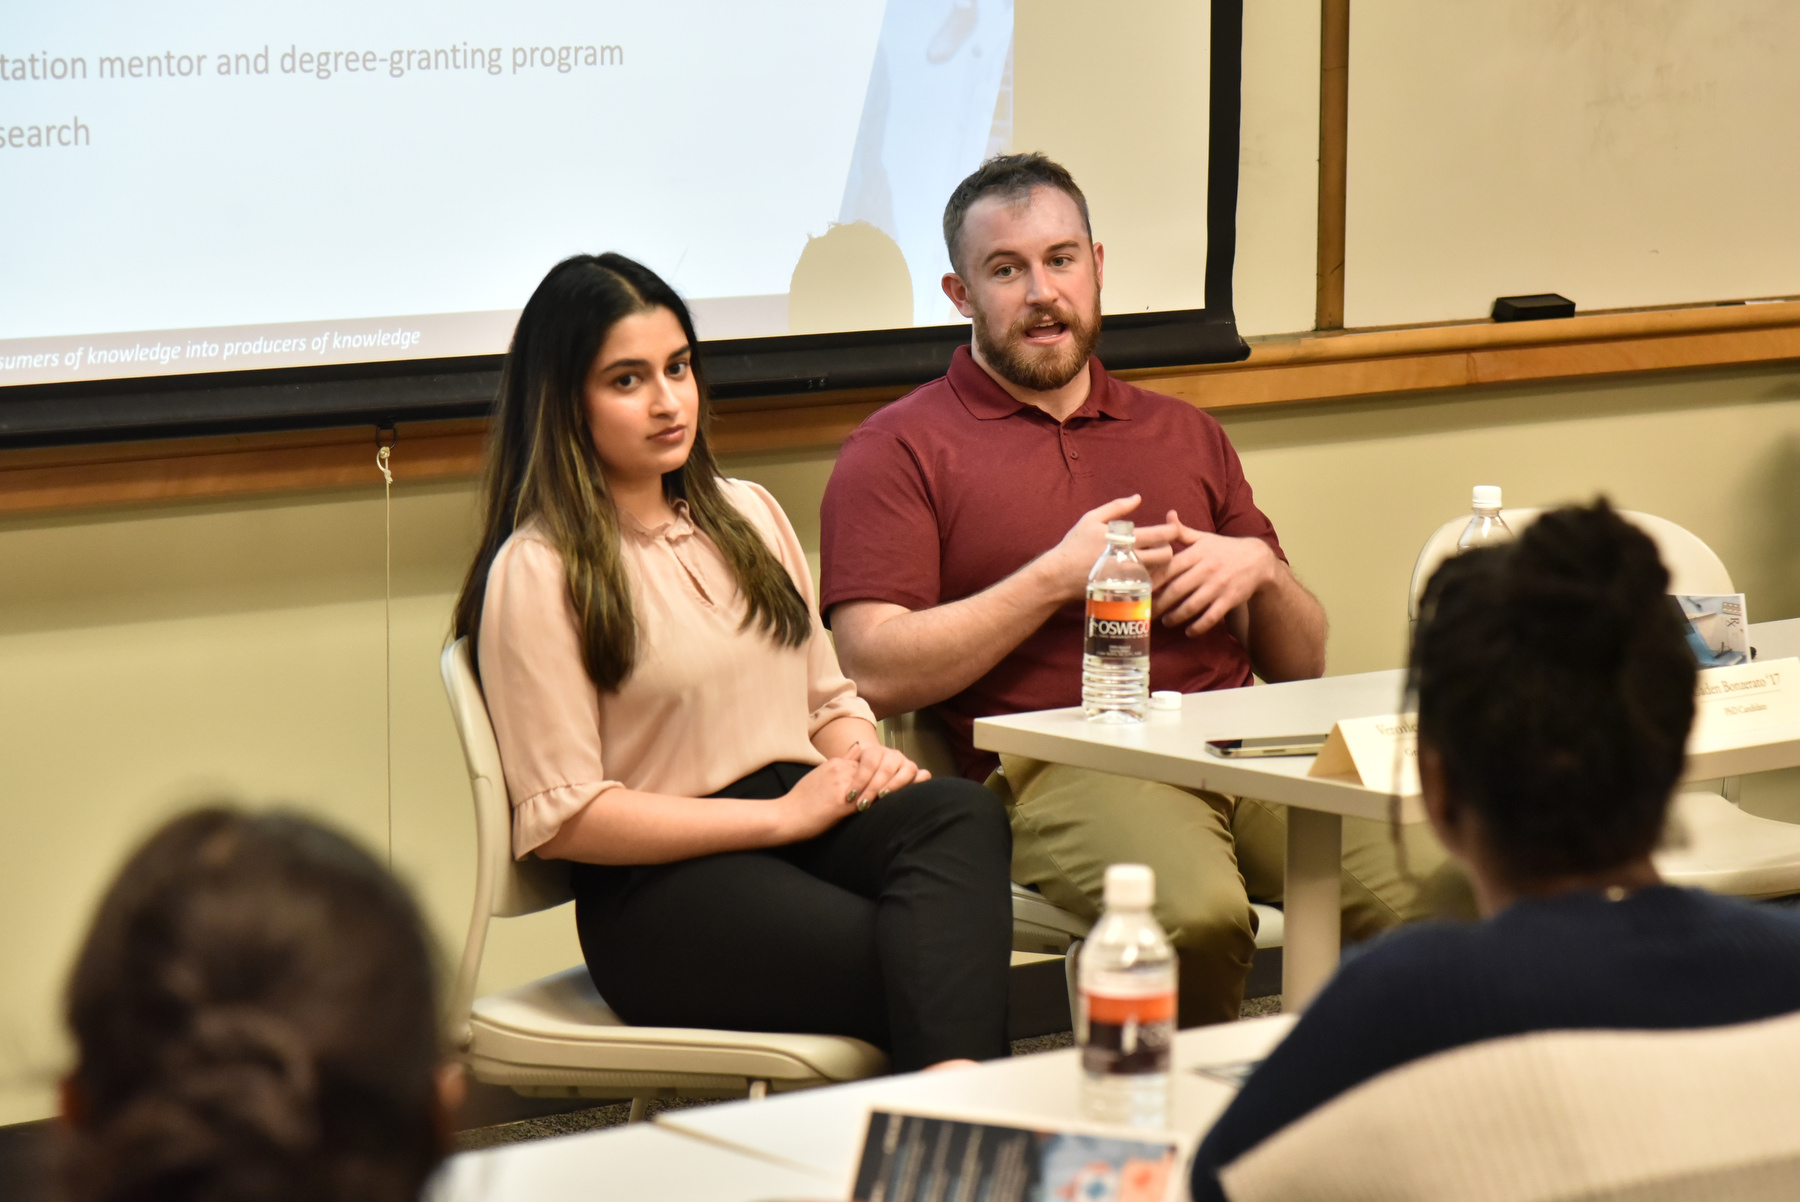 At the university’s March Healthcare Careers Conference, Veronica Singh '19, a graduate student at SUNY Upstate Medical University, and Caden Bonzerato '17, a Ph.D. Student at SUNY Upstate Medical University, discuss medical research careers.